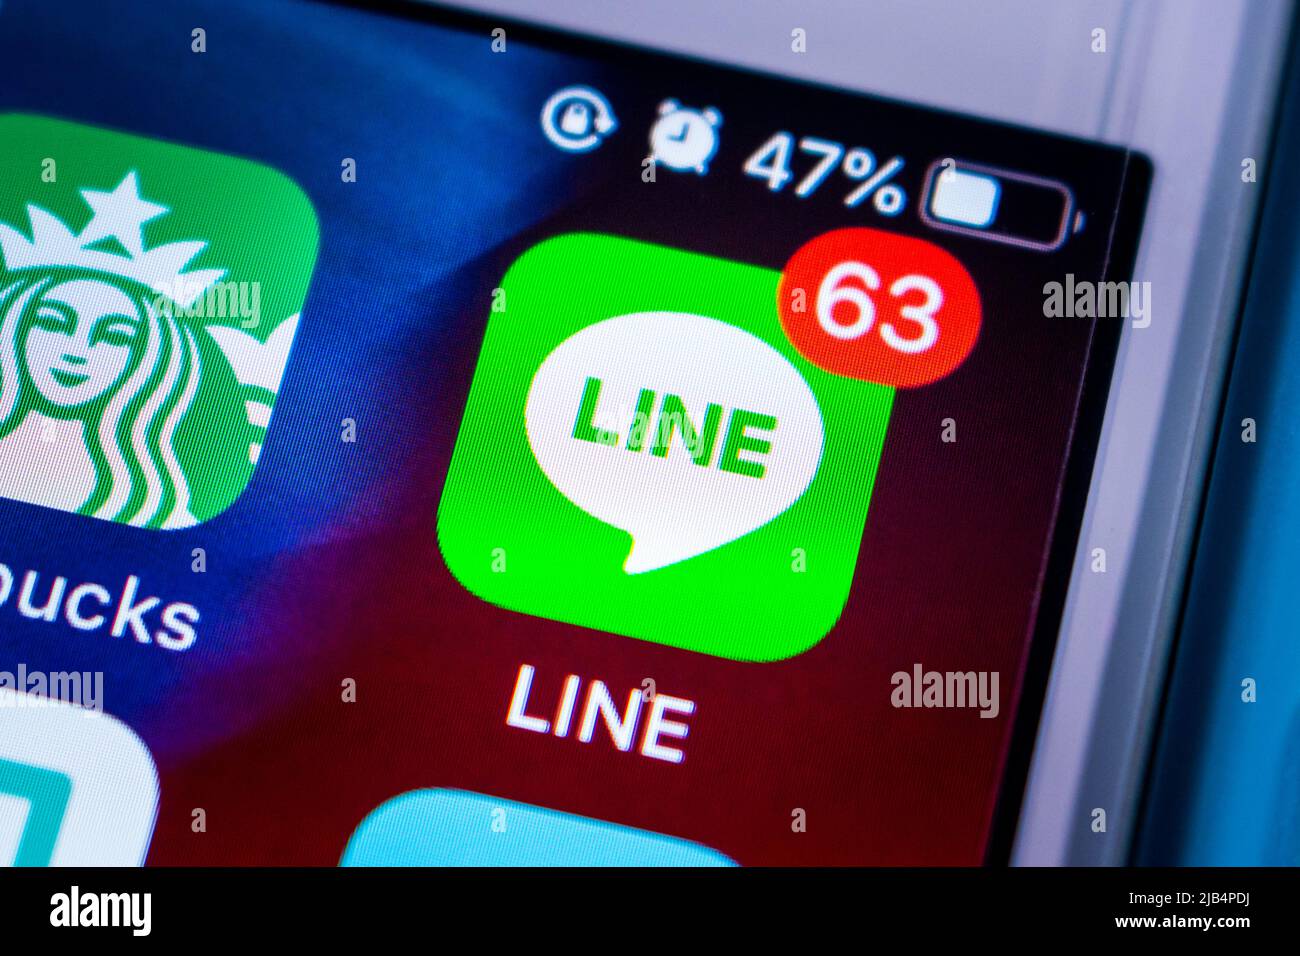 Kumamoto, Japan - Apr 29, 2020 : LINE app with badge 63 on iPhone home screen. LINE is a freeware app for instant communications on electronic devices Stock Photo